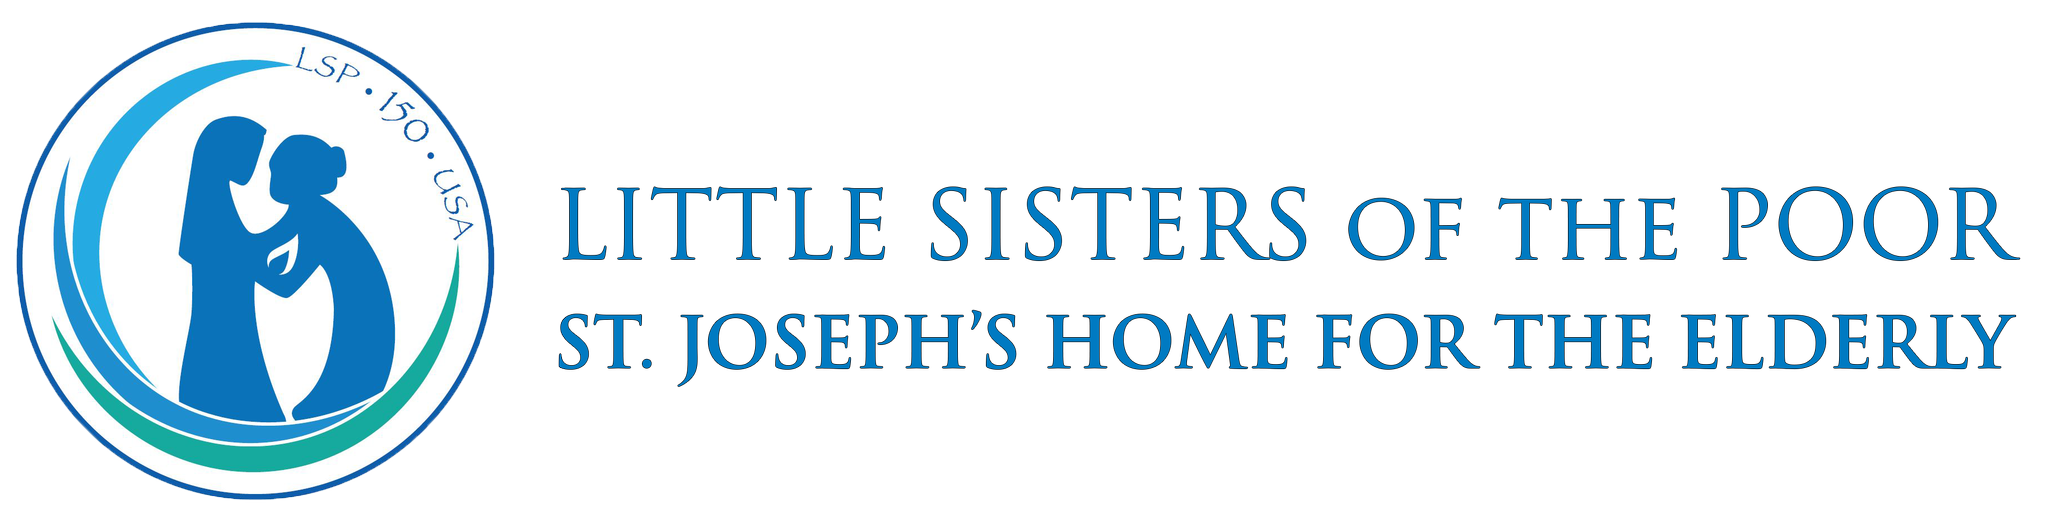 Little Sisters of the Poor Totowa